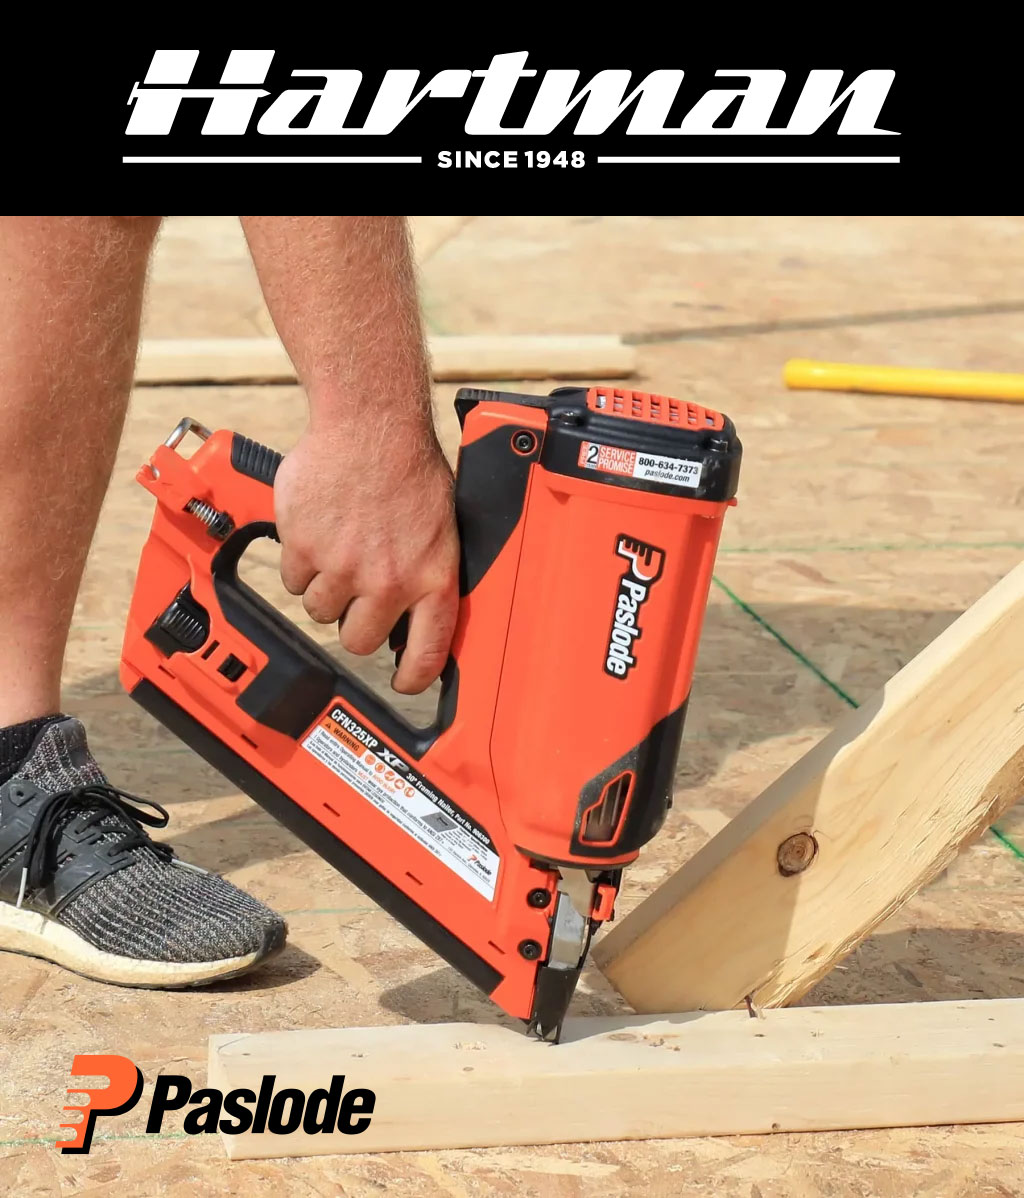 Paslode Cordless XP Framing Nailer Bonus Kit -$399 comes with nailer, two batteries, two fuel cells, and 200 nails in one package! bit.ly/3TNetzp

#HartmanIndco #HartmanNails #Paslode #FramingTools #NailerKits